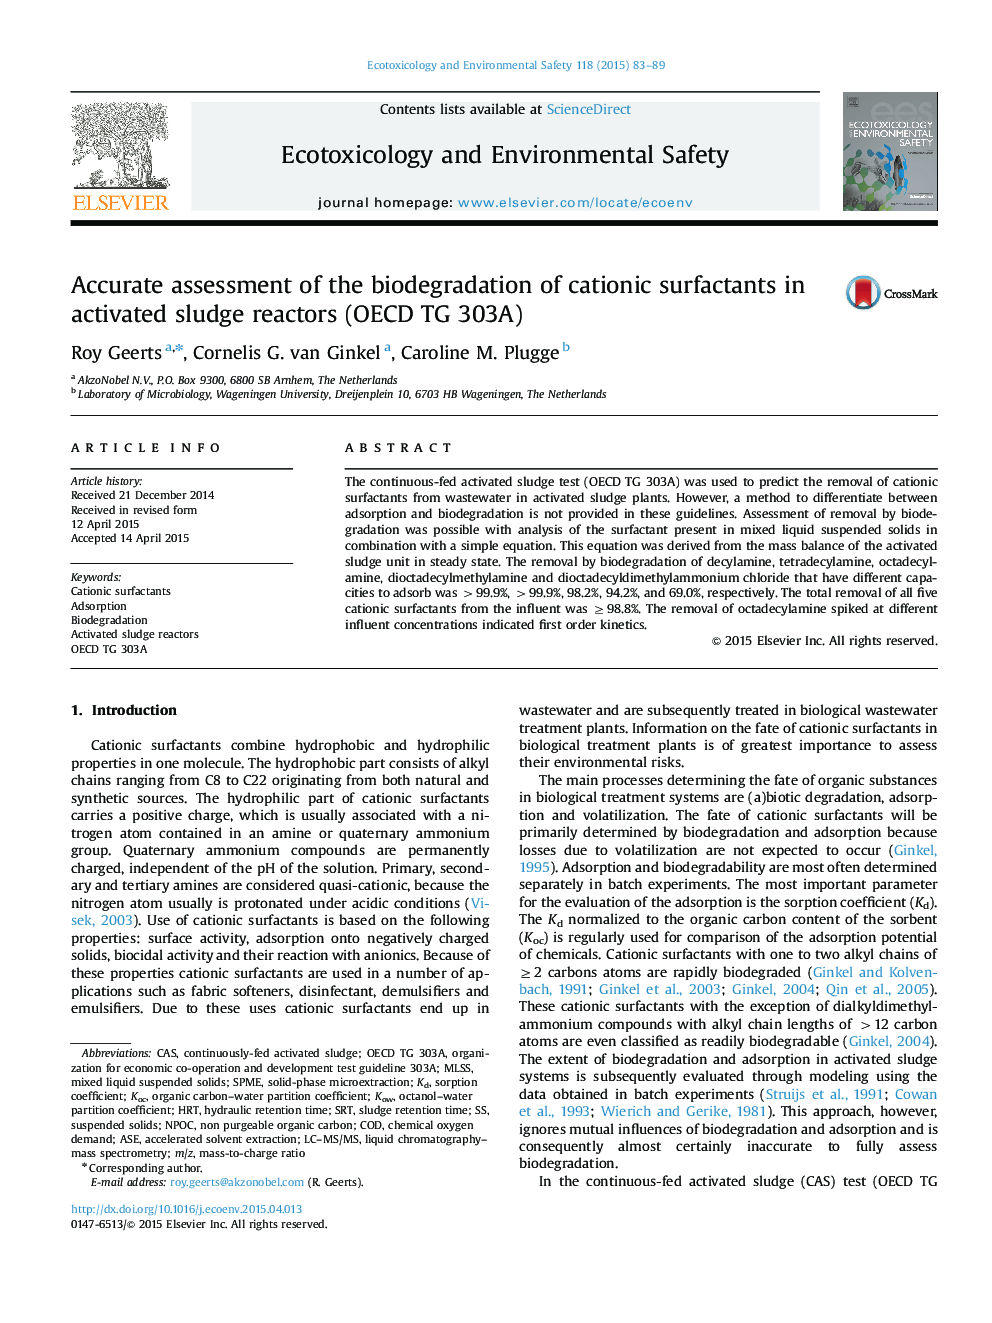 Accurate assessment of the biodegradation of cationic surfactants in activated sludge reactors (OECD TG 303A)